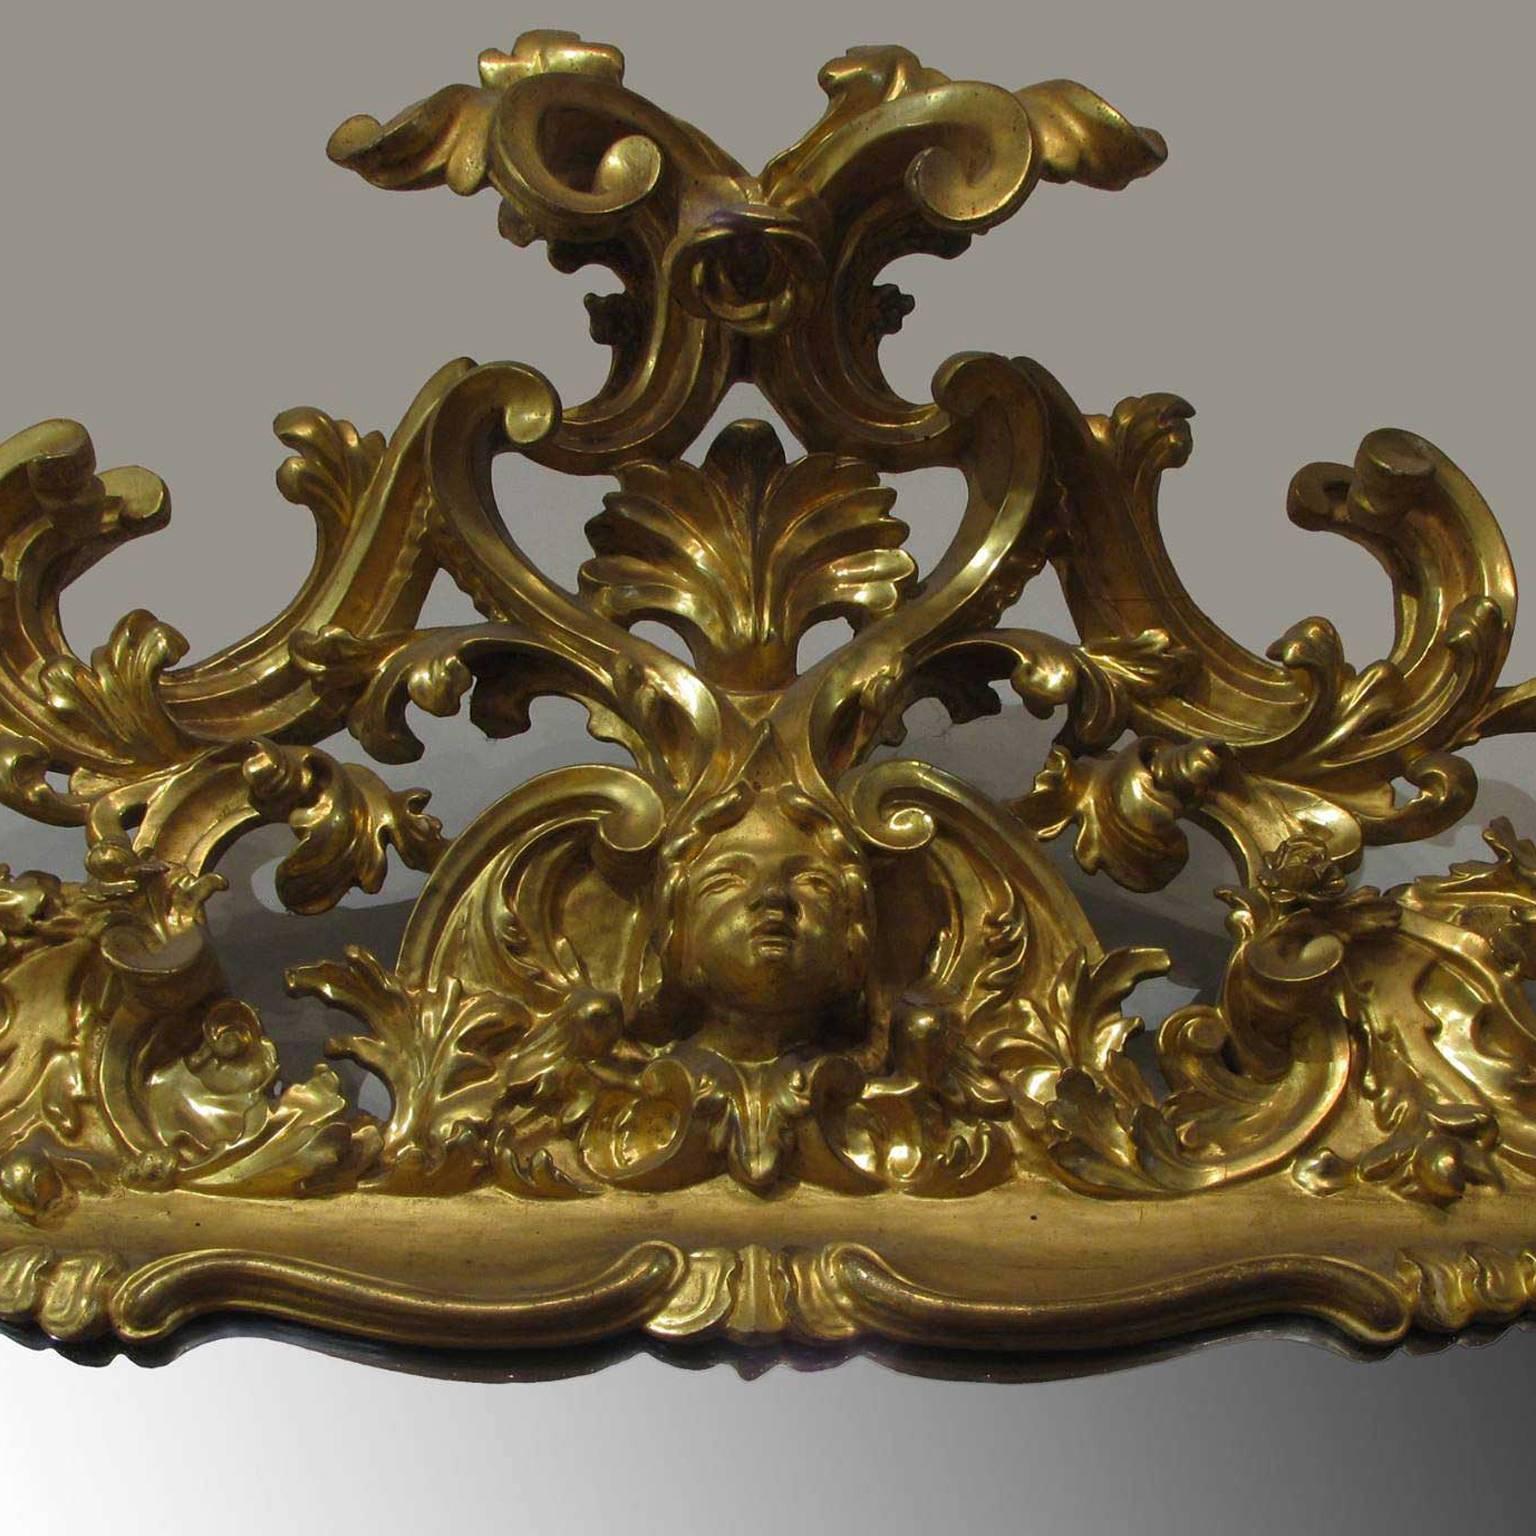 
A monumental Tuscan mirror in a carved and leaf gilded wooden frame with floral scrolls, figures, cherubs, gargoyles and silvered mirror plate.
Made in the first half of the 18th century, during the period of Louis XV. 
For its features, as the